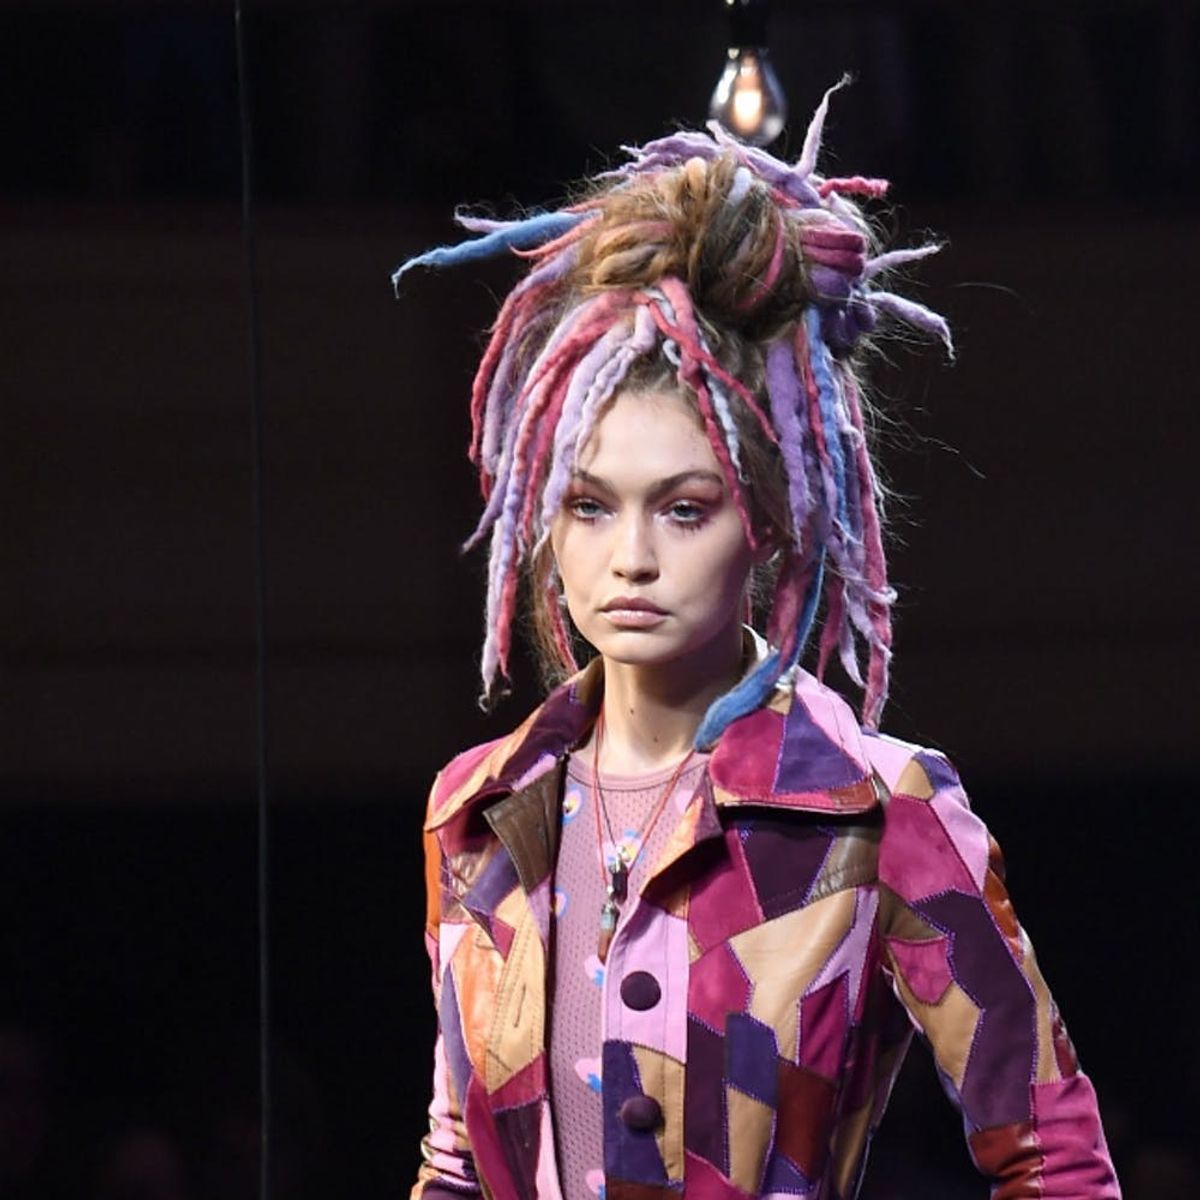 Why People Are Not Happy About Marc Jacobs Controversial Runway Show